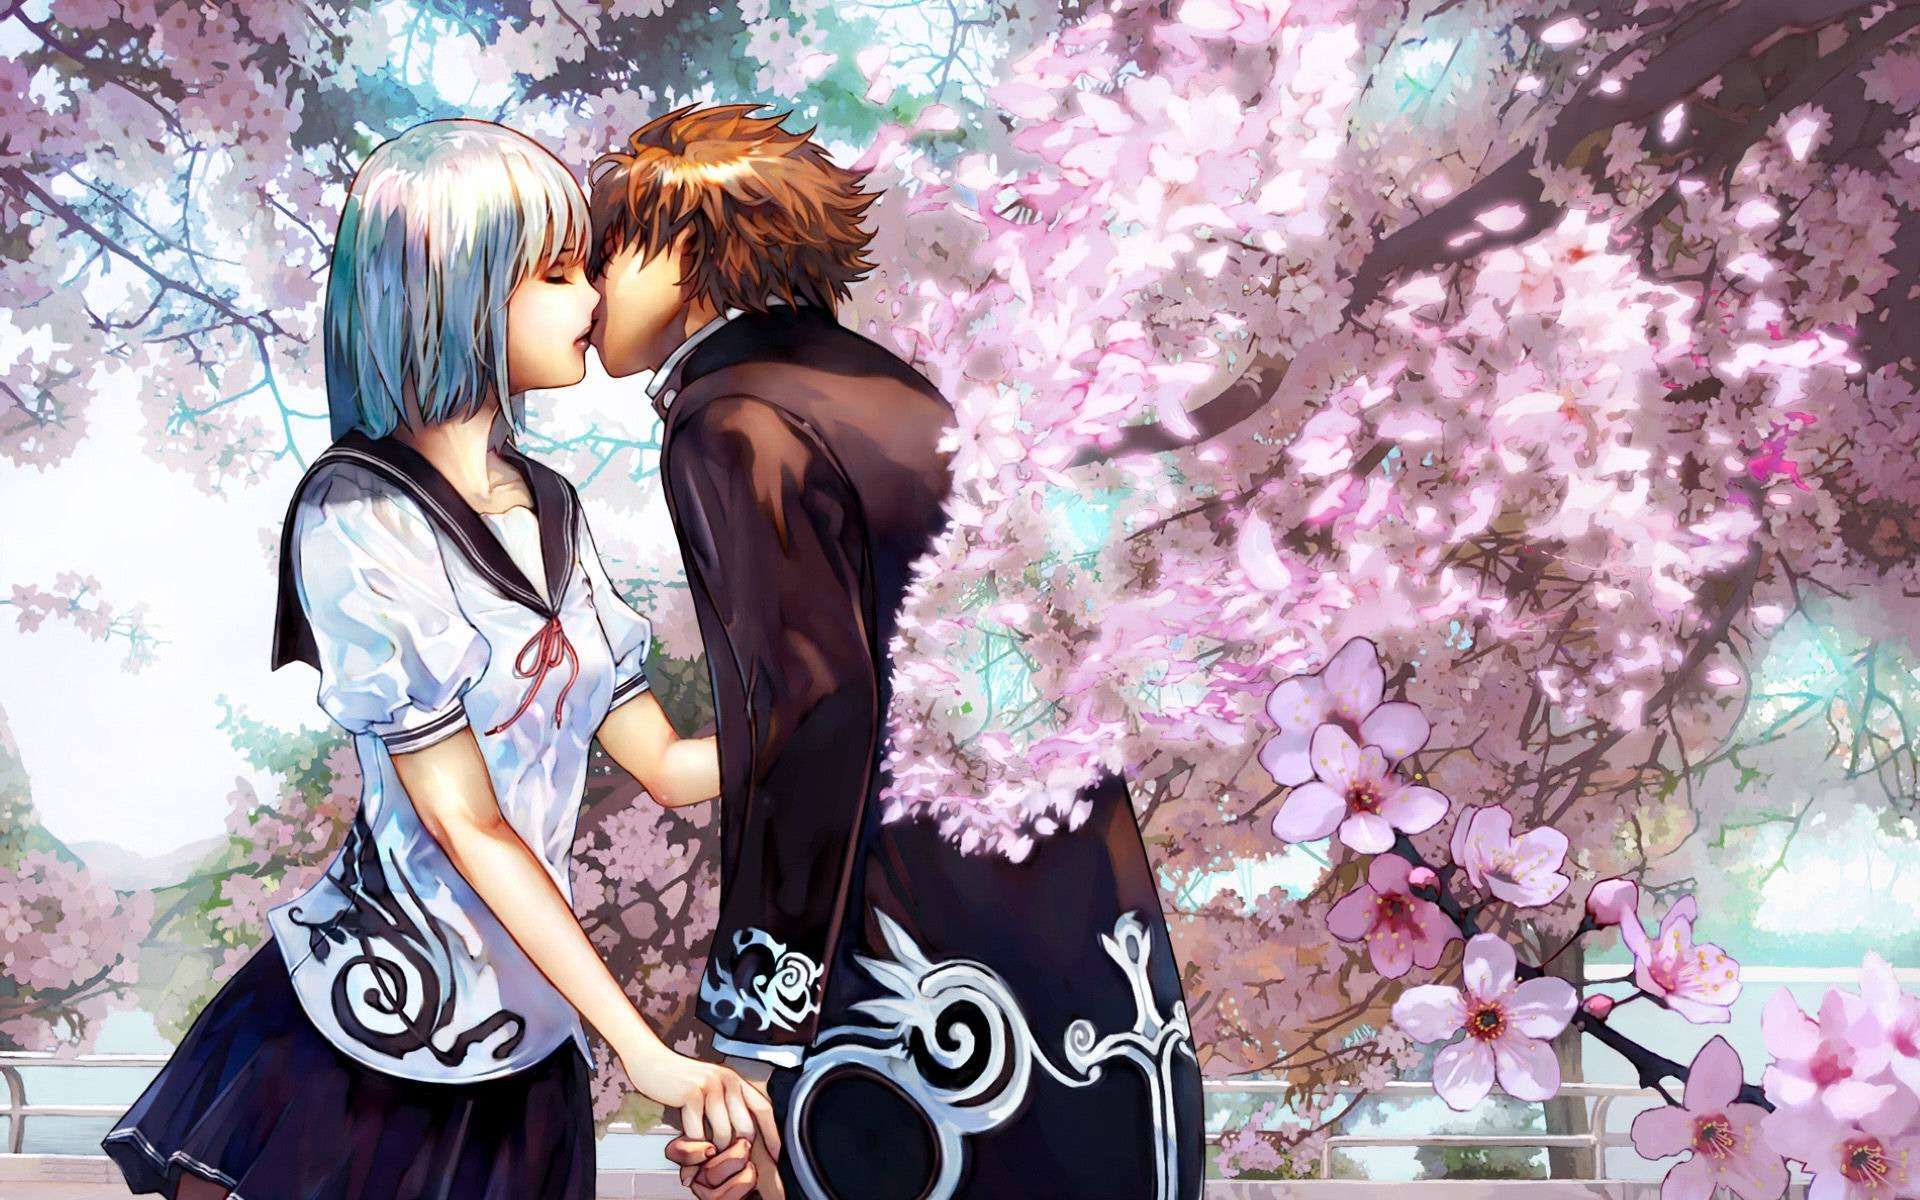 Cute Anime Love Wallpapers - Wallpaper Cave